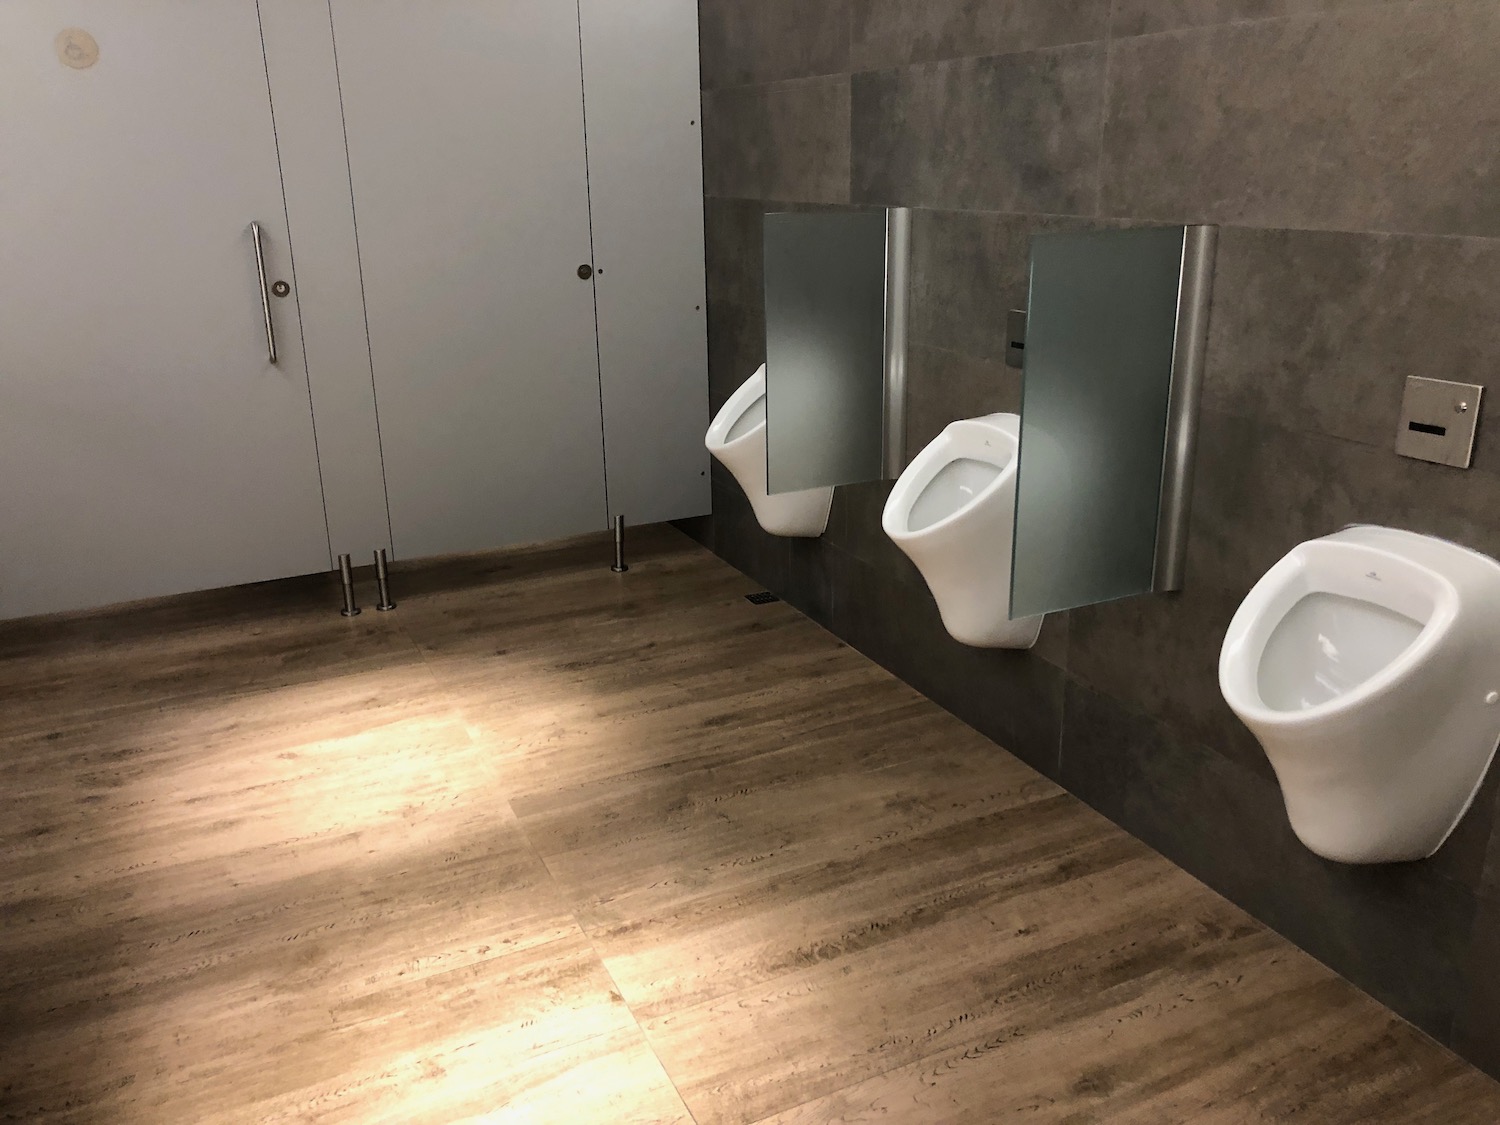 a bathroom with urinals and doors